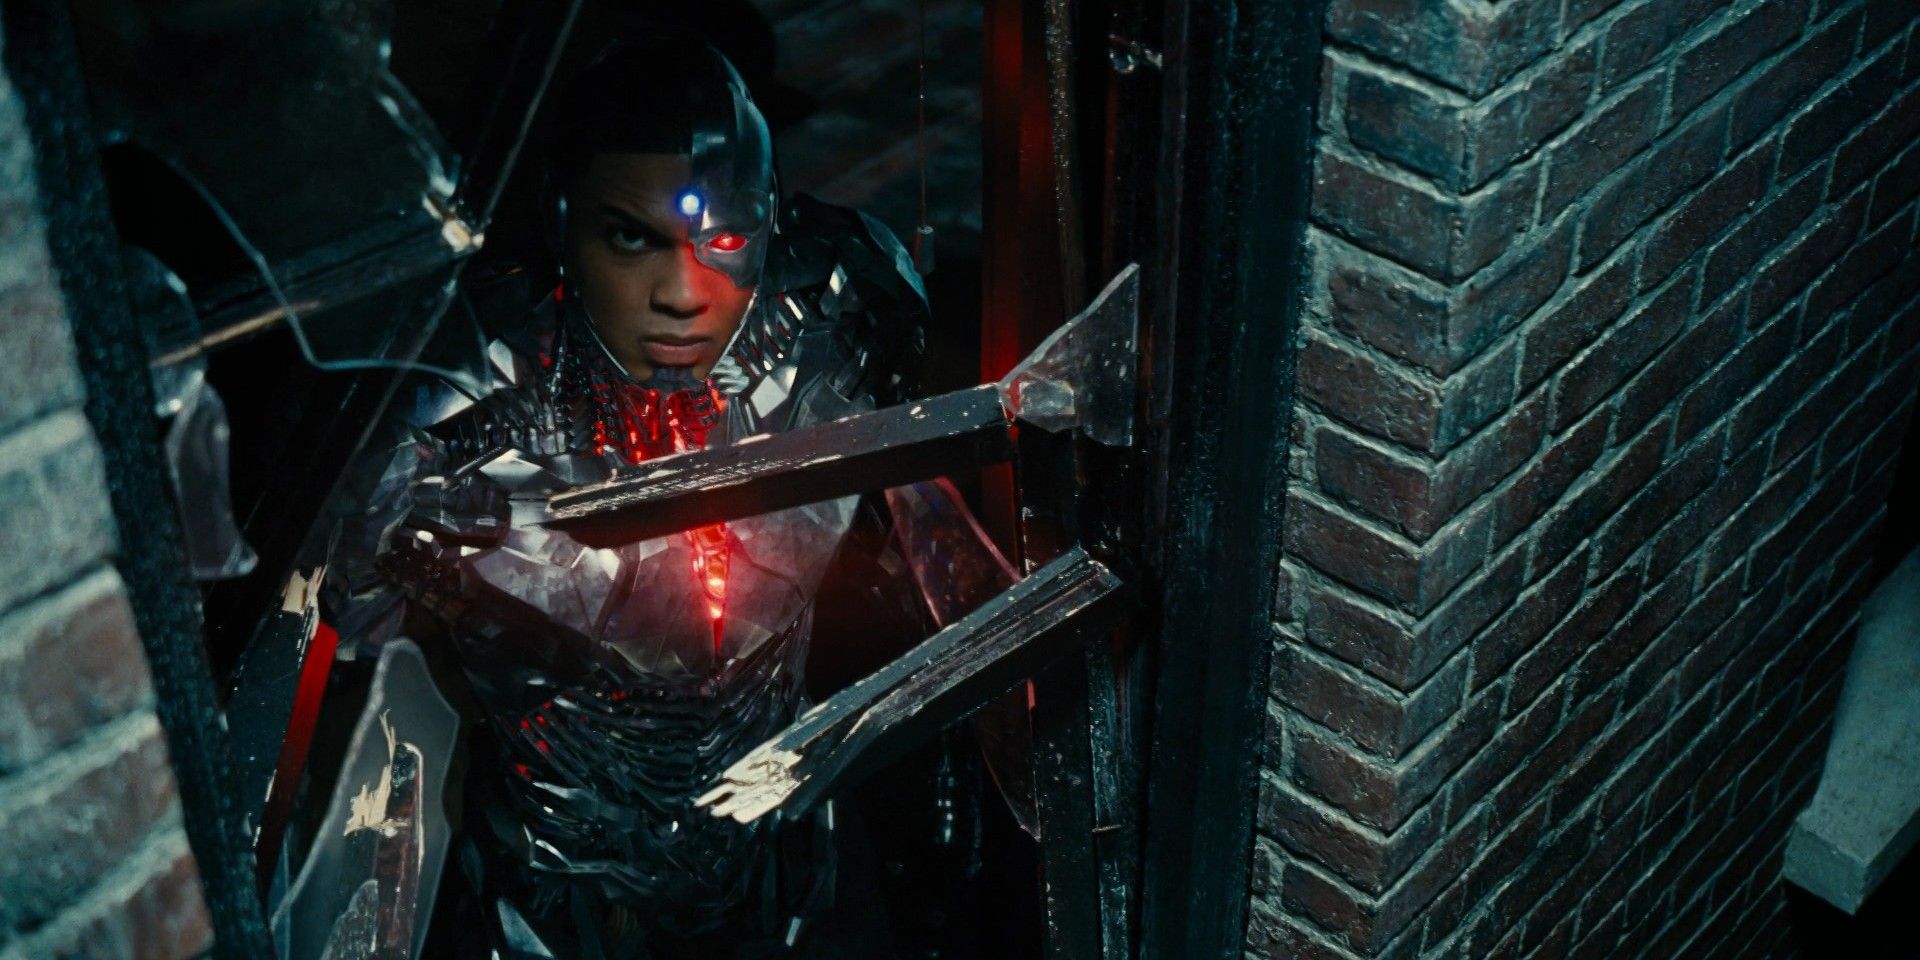 Ray Fisher as Cyborg in Zack Snyder Justice League